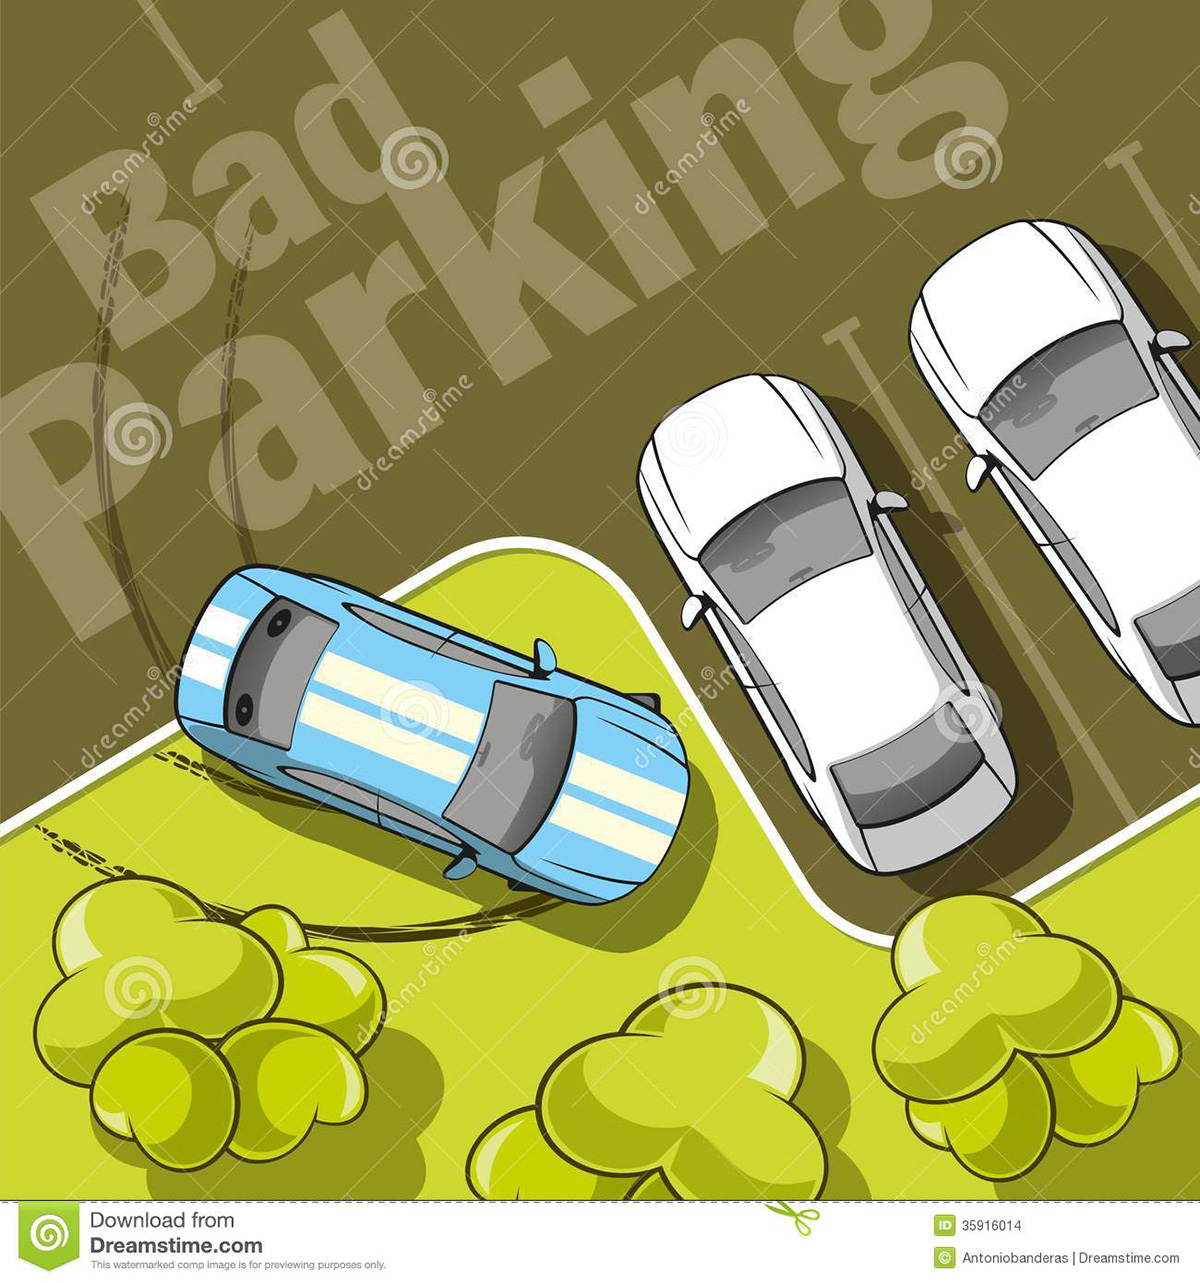 bad-parking-top-view-car-parked-lawn-trees-35916014